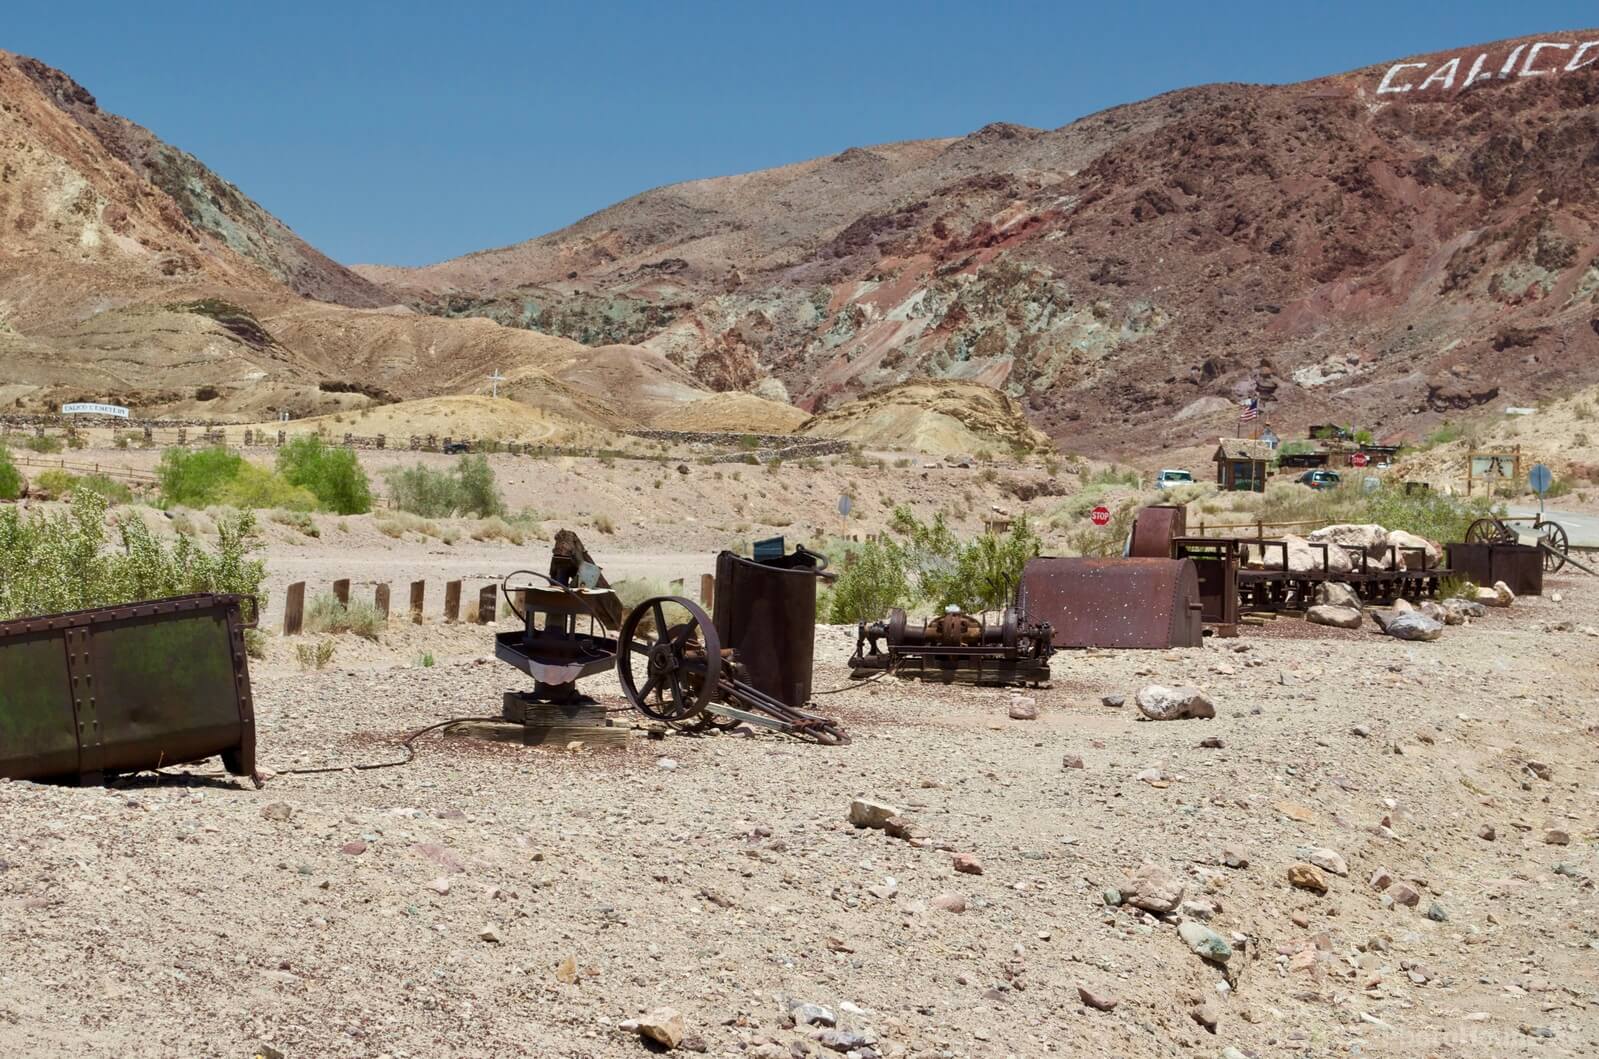 Image of Calico Ghost Town by Steve West